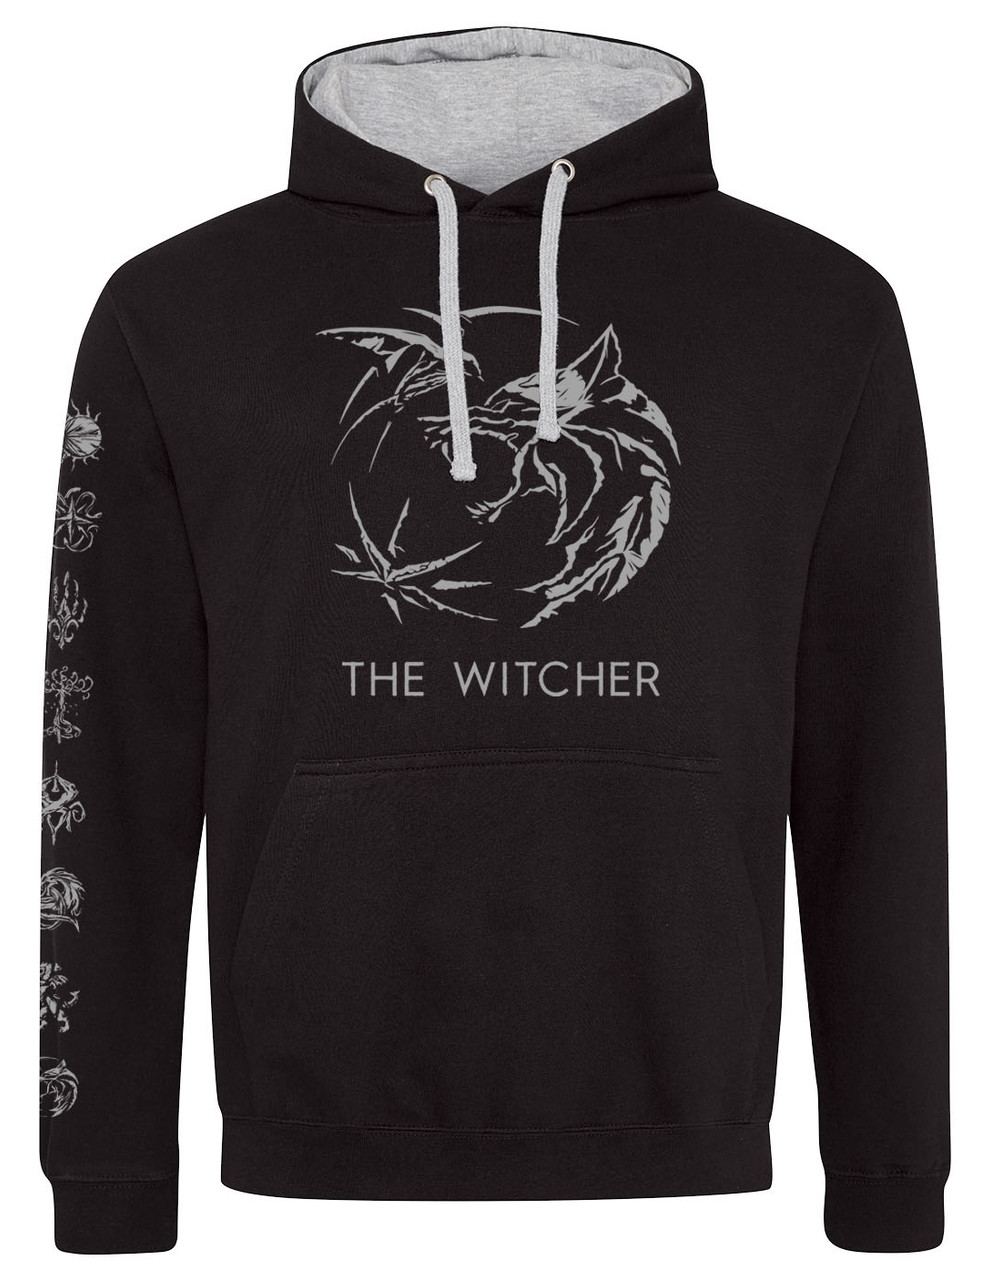 The Witcher 'Symbol' (Black) Pull Over Hoodie